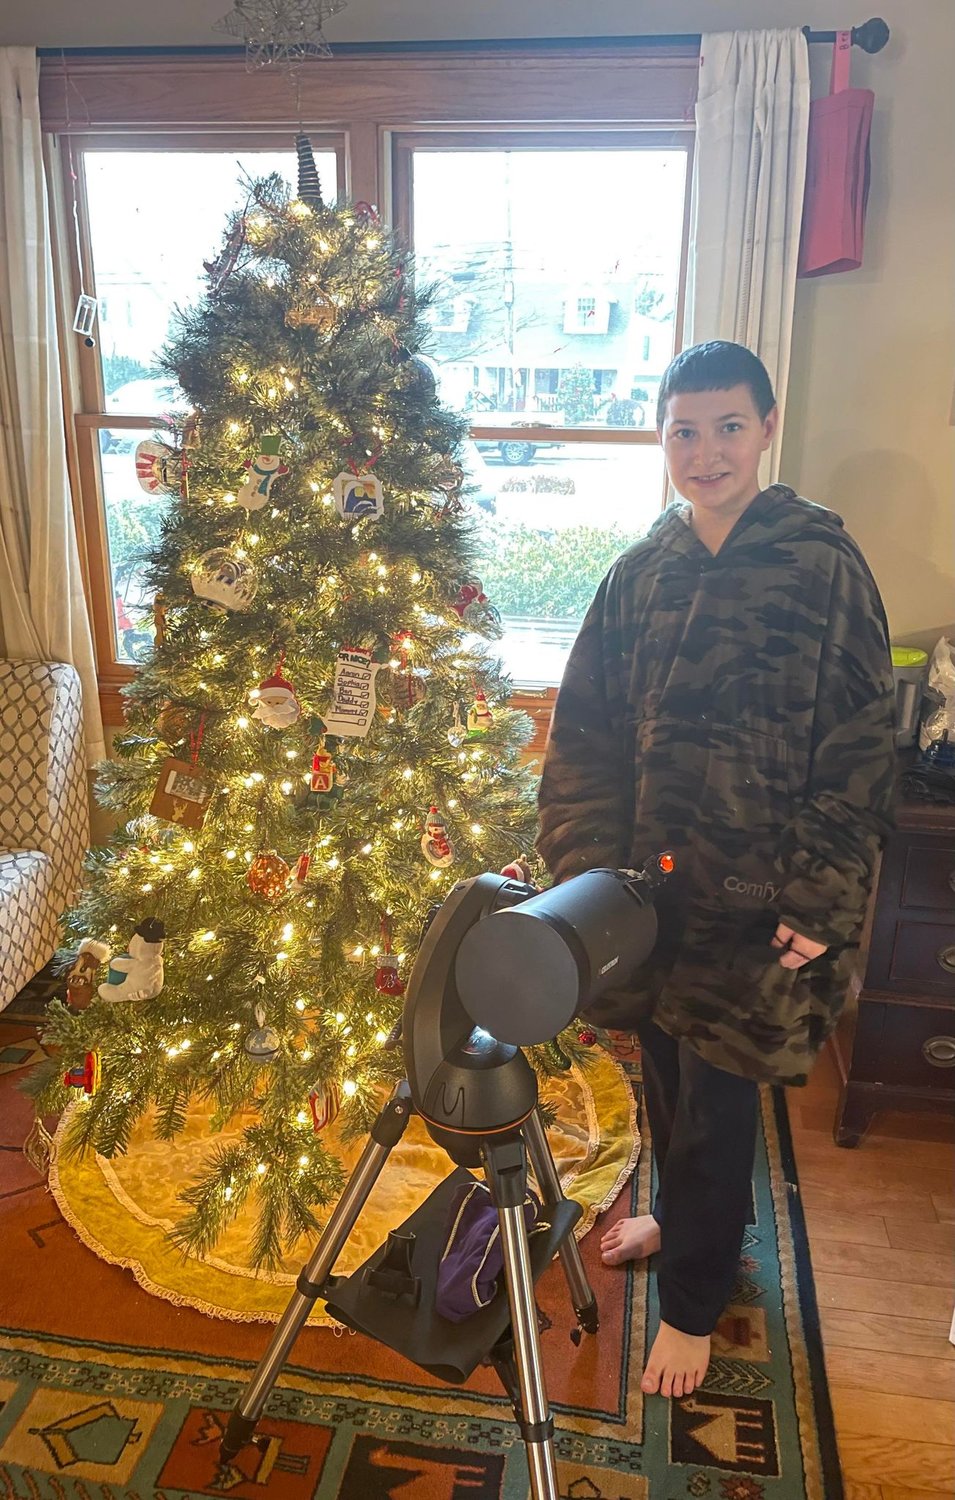 Benjamin McInnes, age 11, Bayport 
“Tracking Santa on the Santa tracker app and opening up the presents on Christmas morning.”